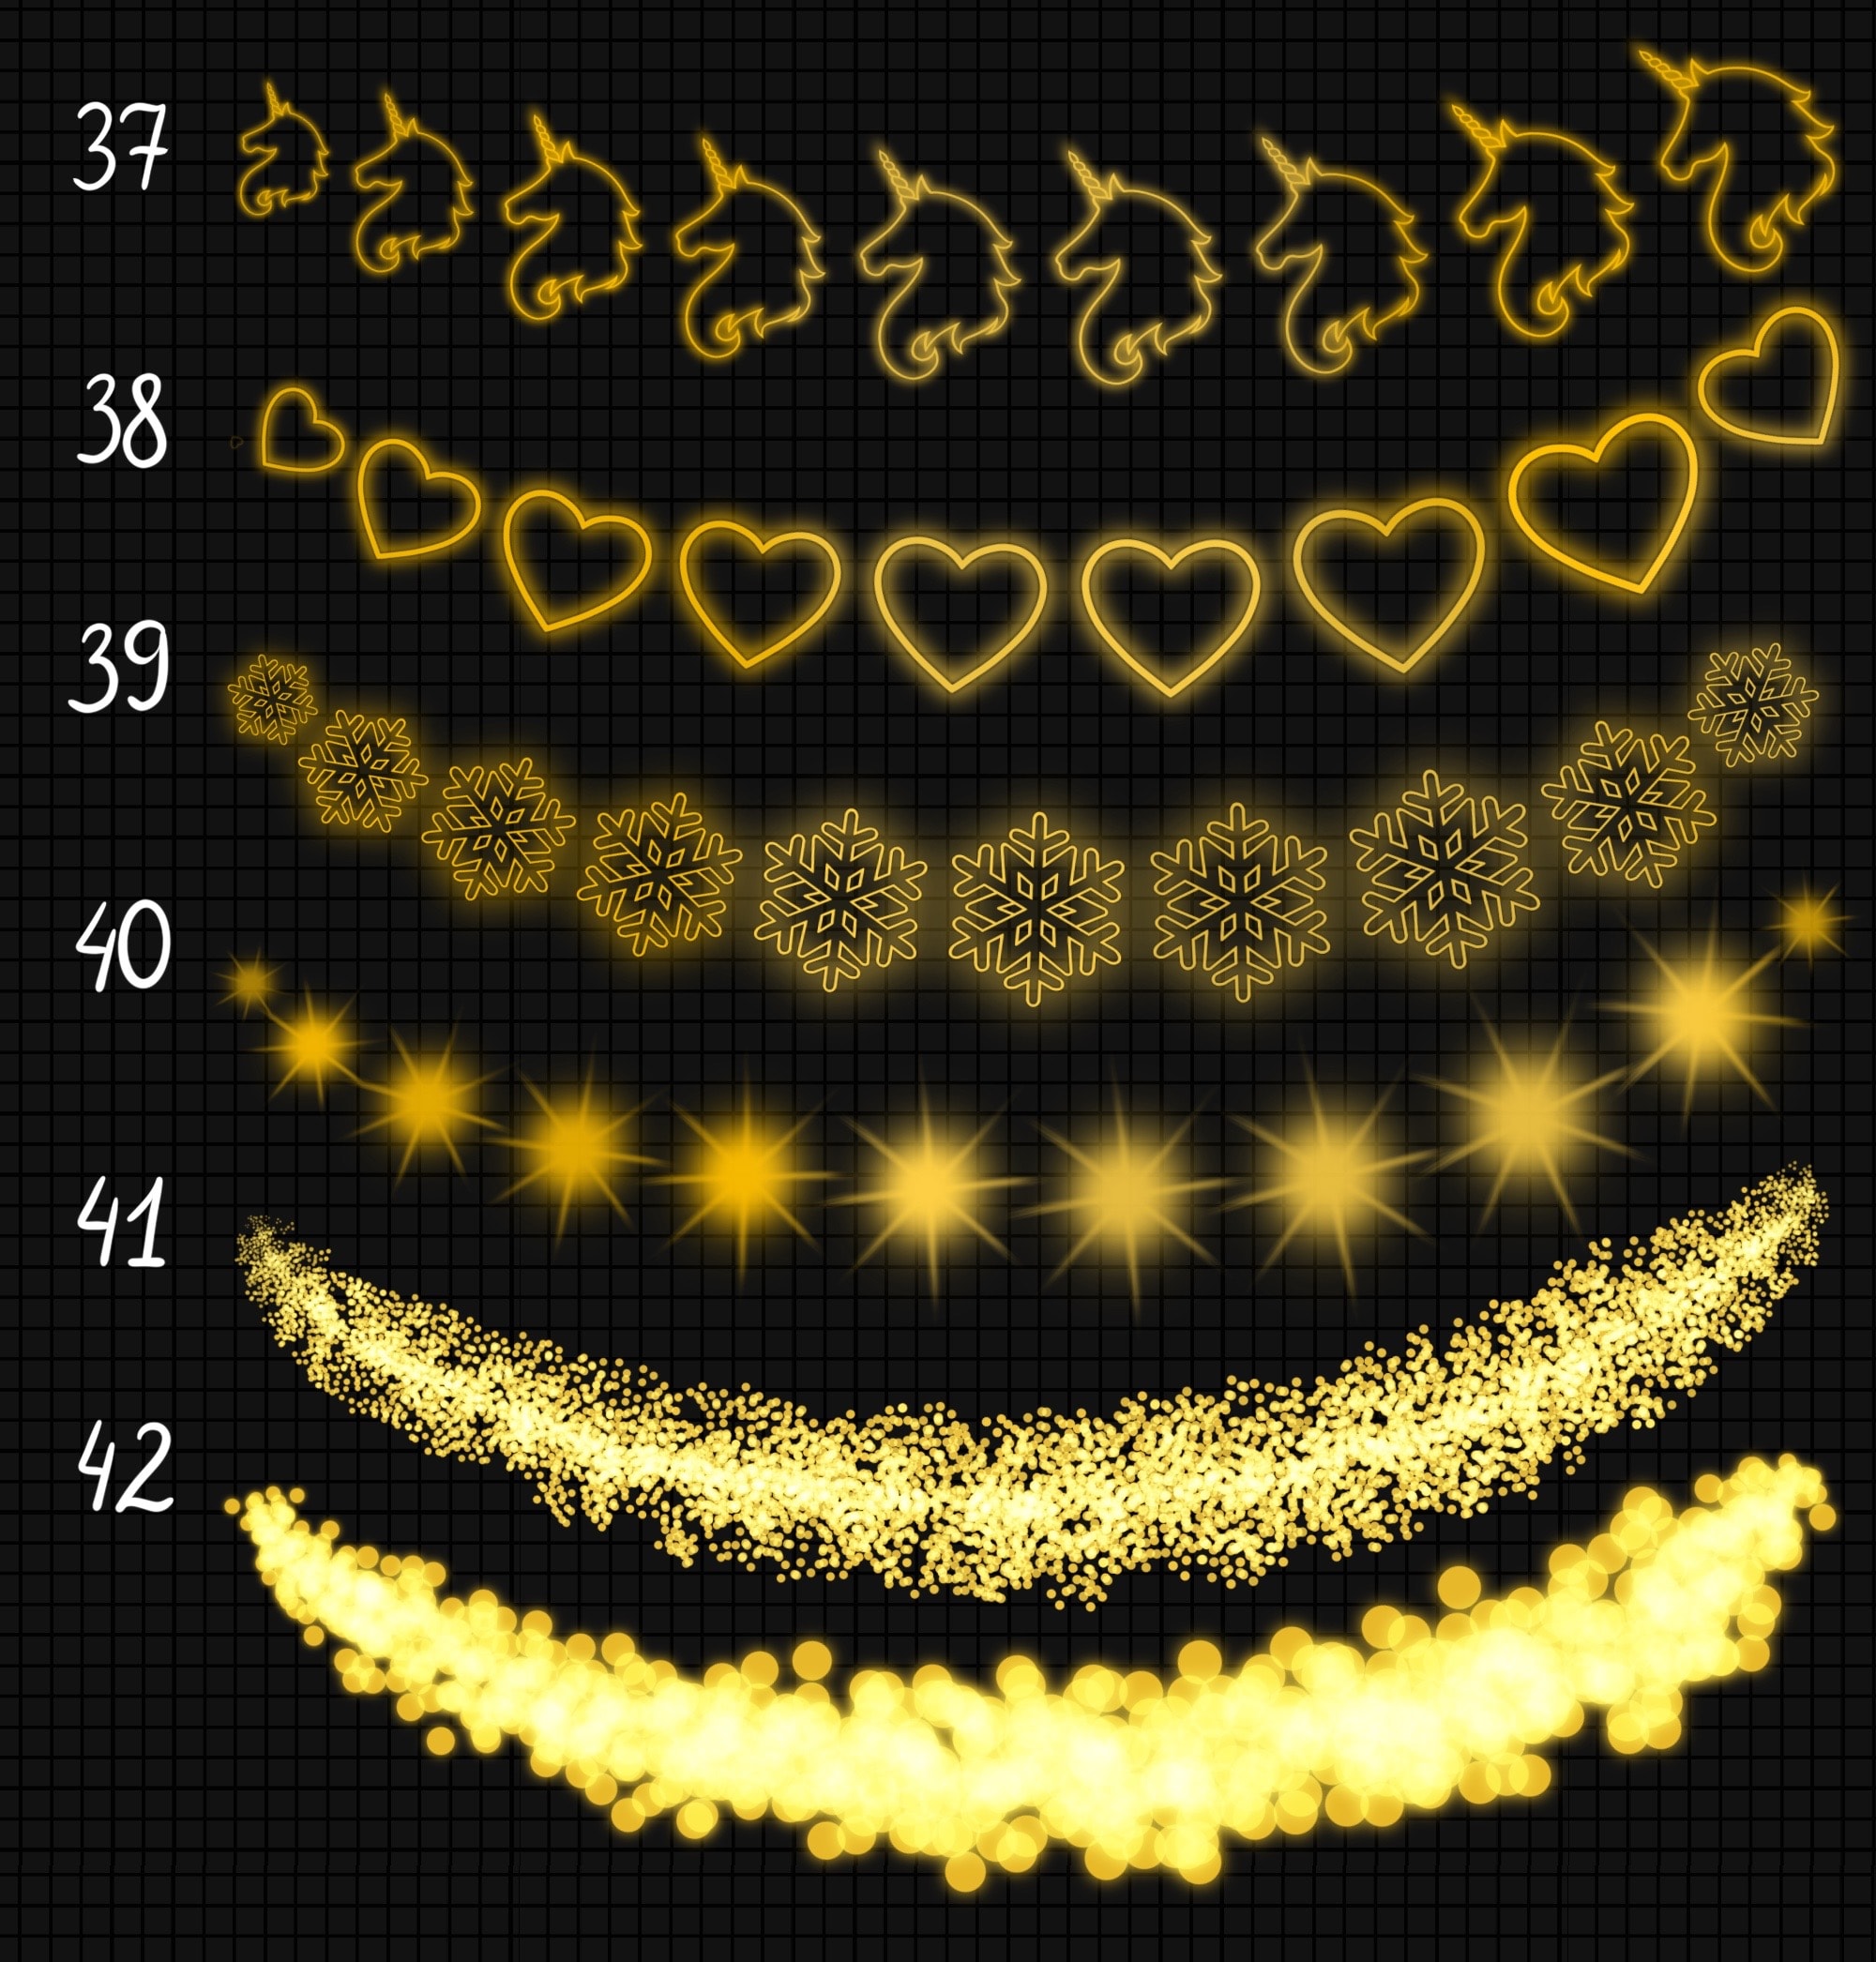 Download 62 PROCREATE GARLAND BRUSHES, Glowing/Lights brushes ...